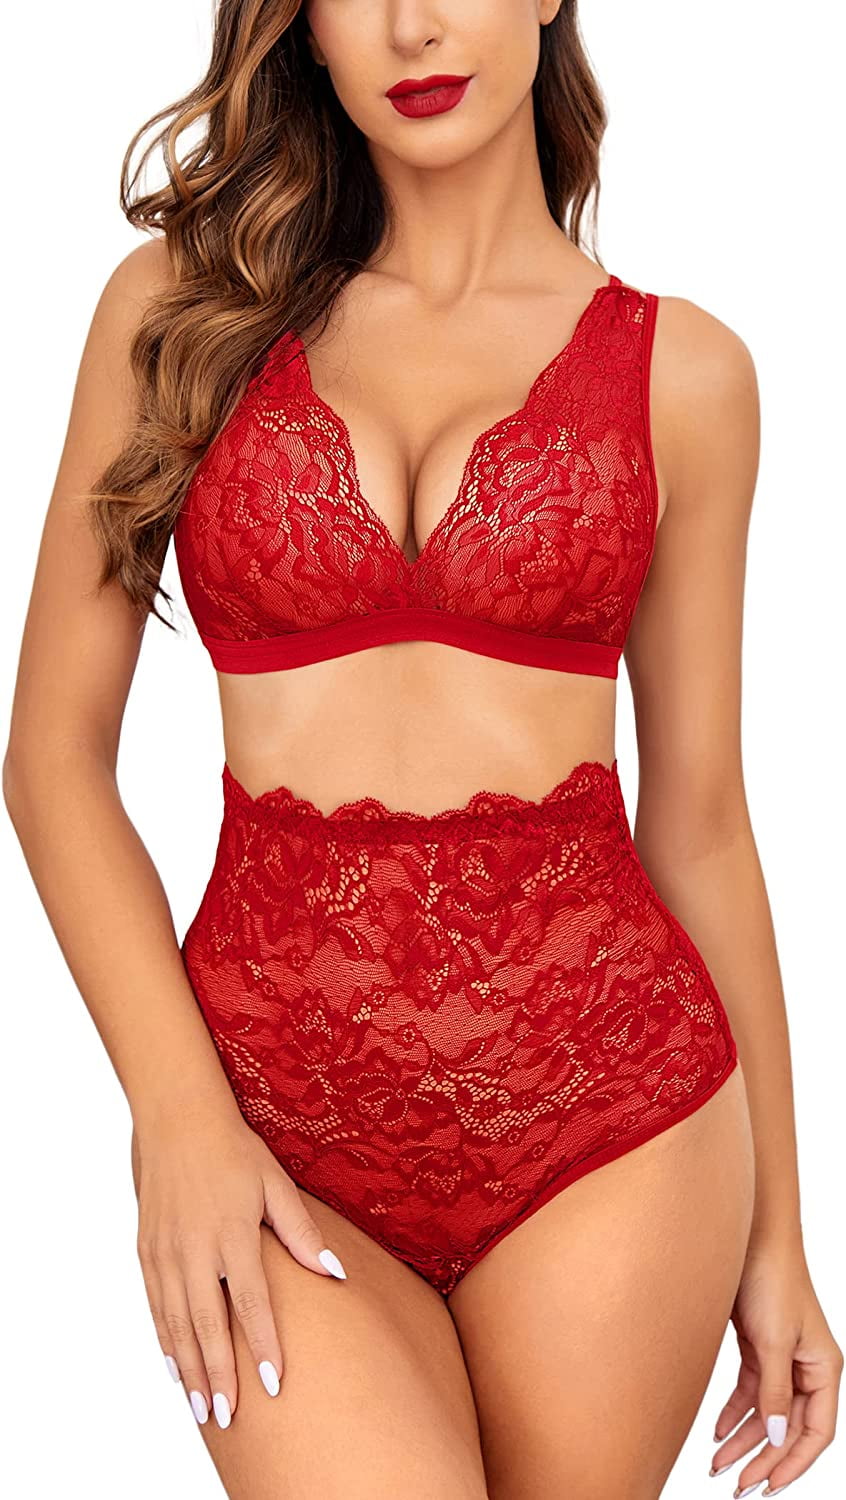 Sexy Lingerie for Women High Waist Bra and Panty Set Strappy